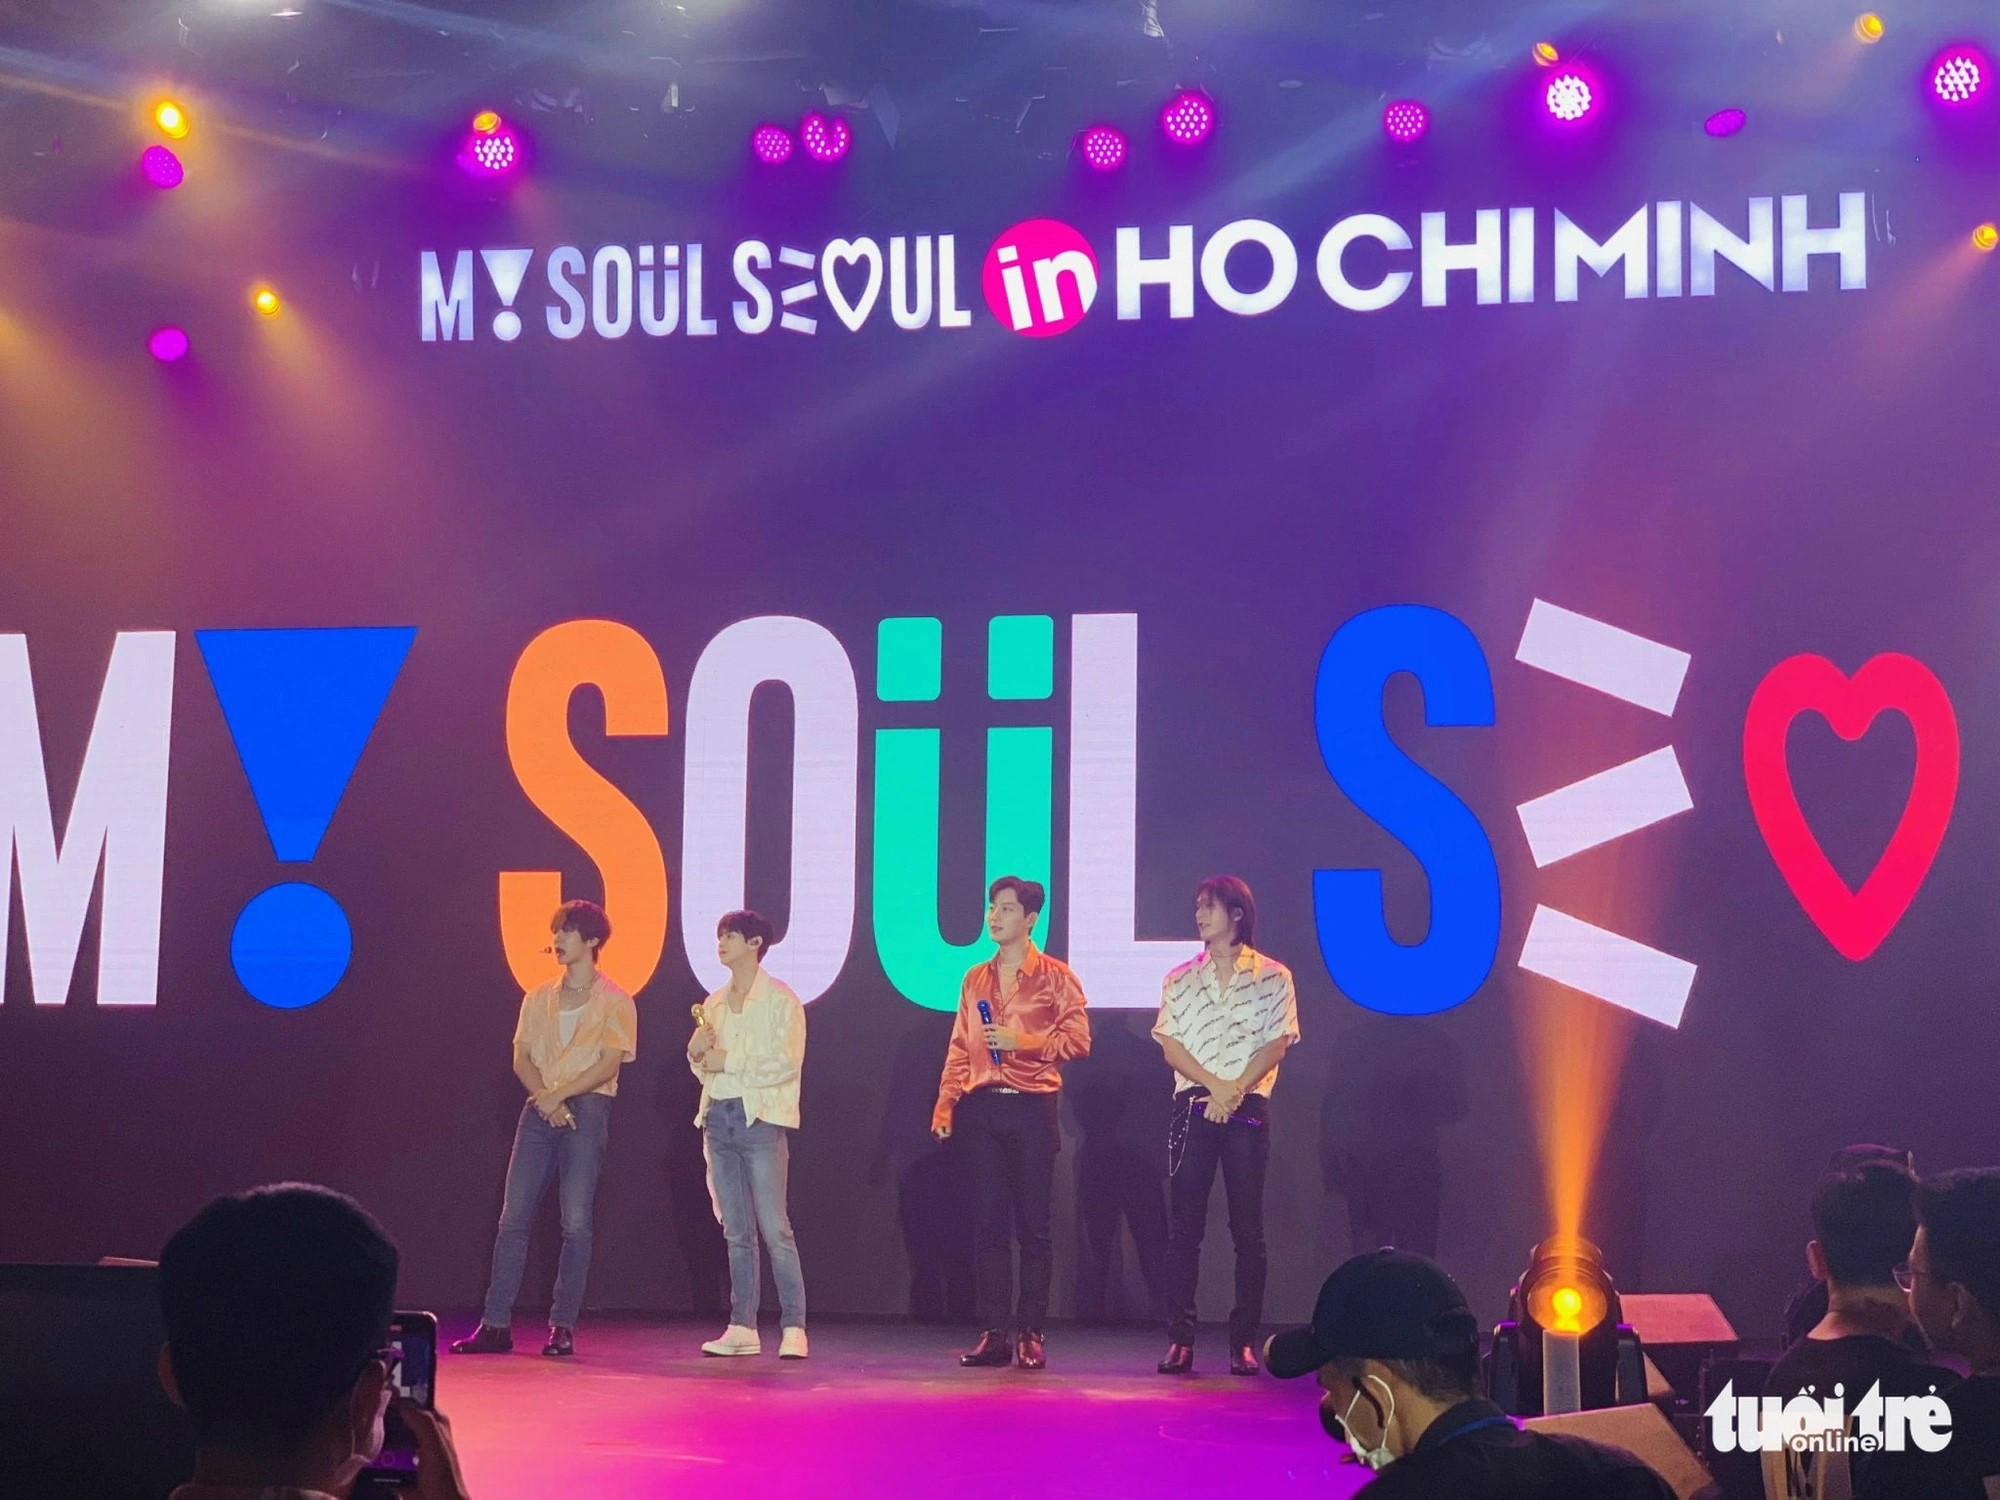 South Korean music group Highlight to come to Hanoi for Christmas performance